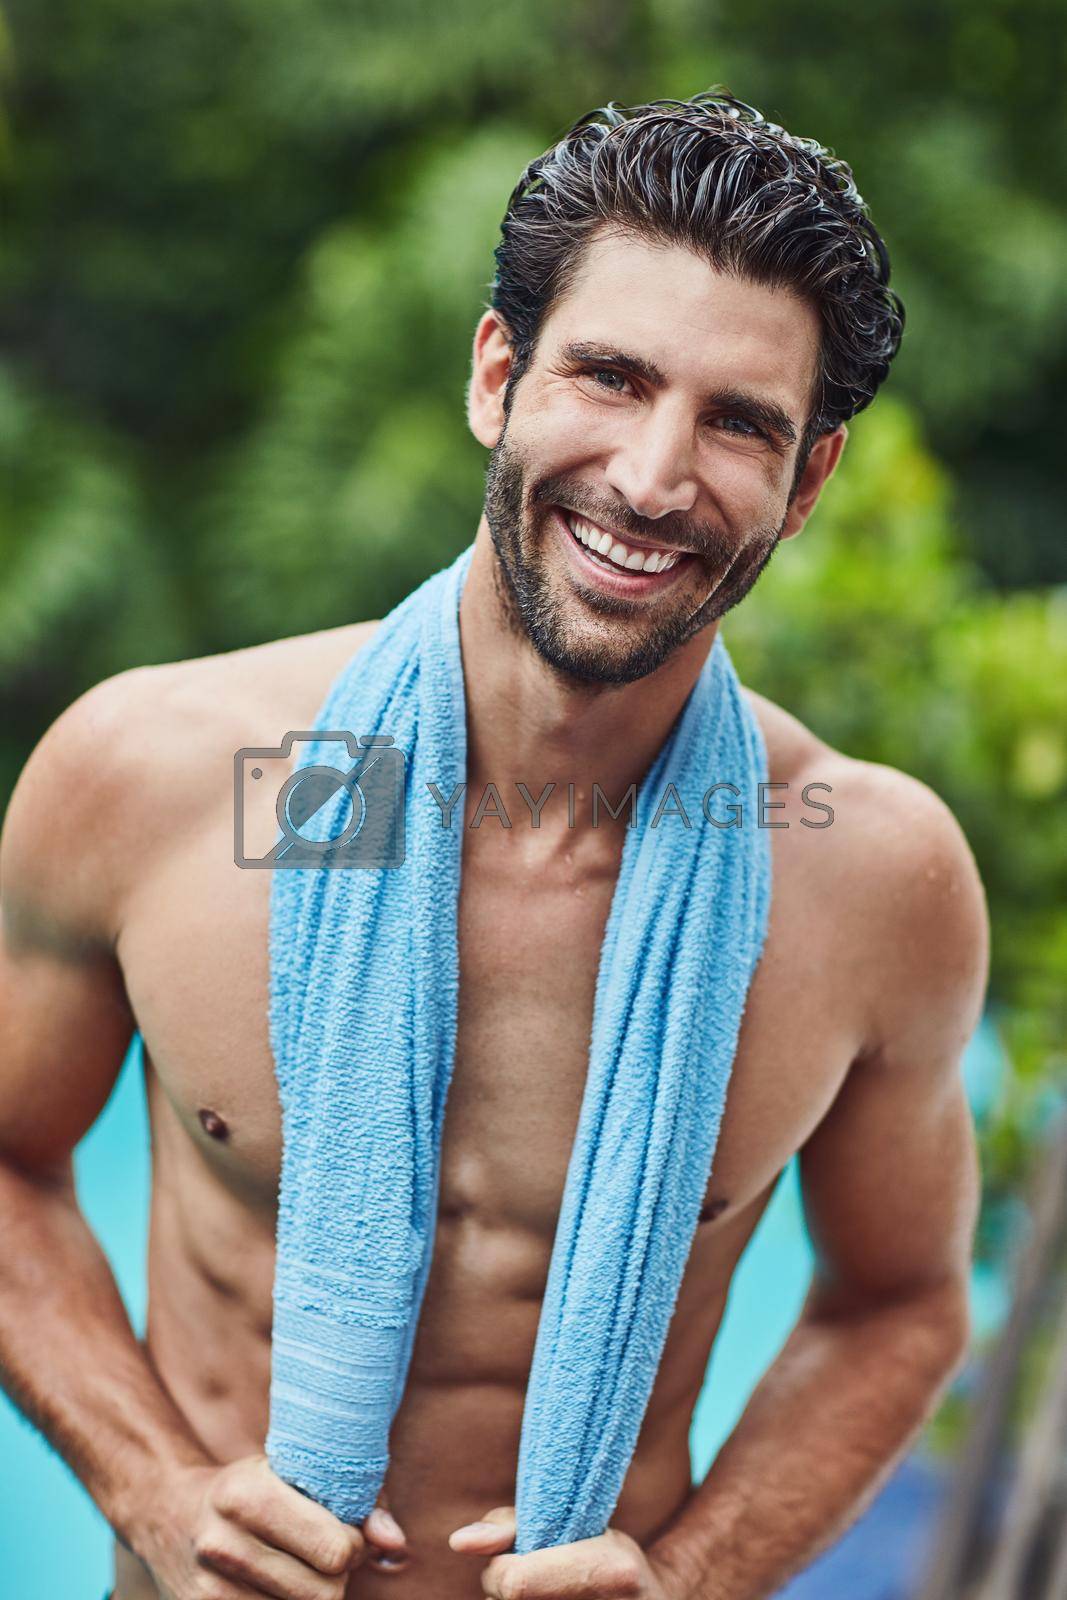 Royalty free image of I always feel happy after a swim. Portrait of a handsome young man who just go out the swimming pool at home. by YuriArcurs